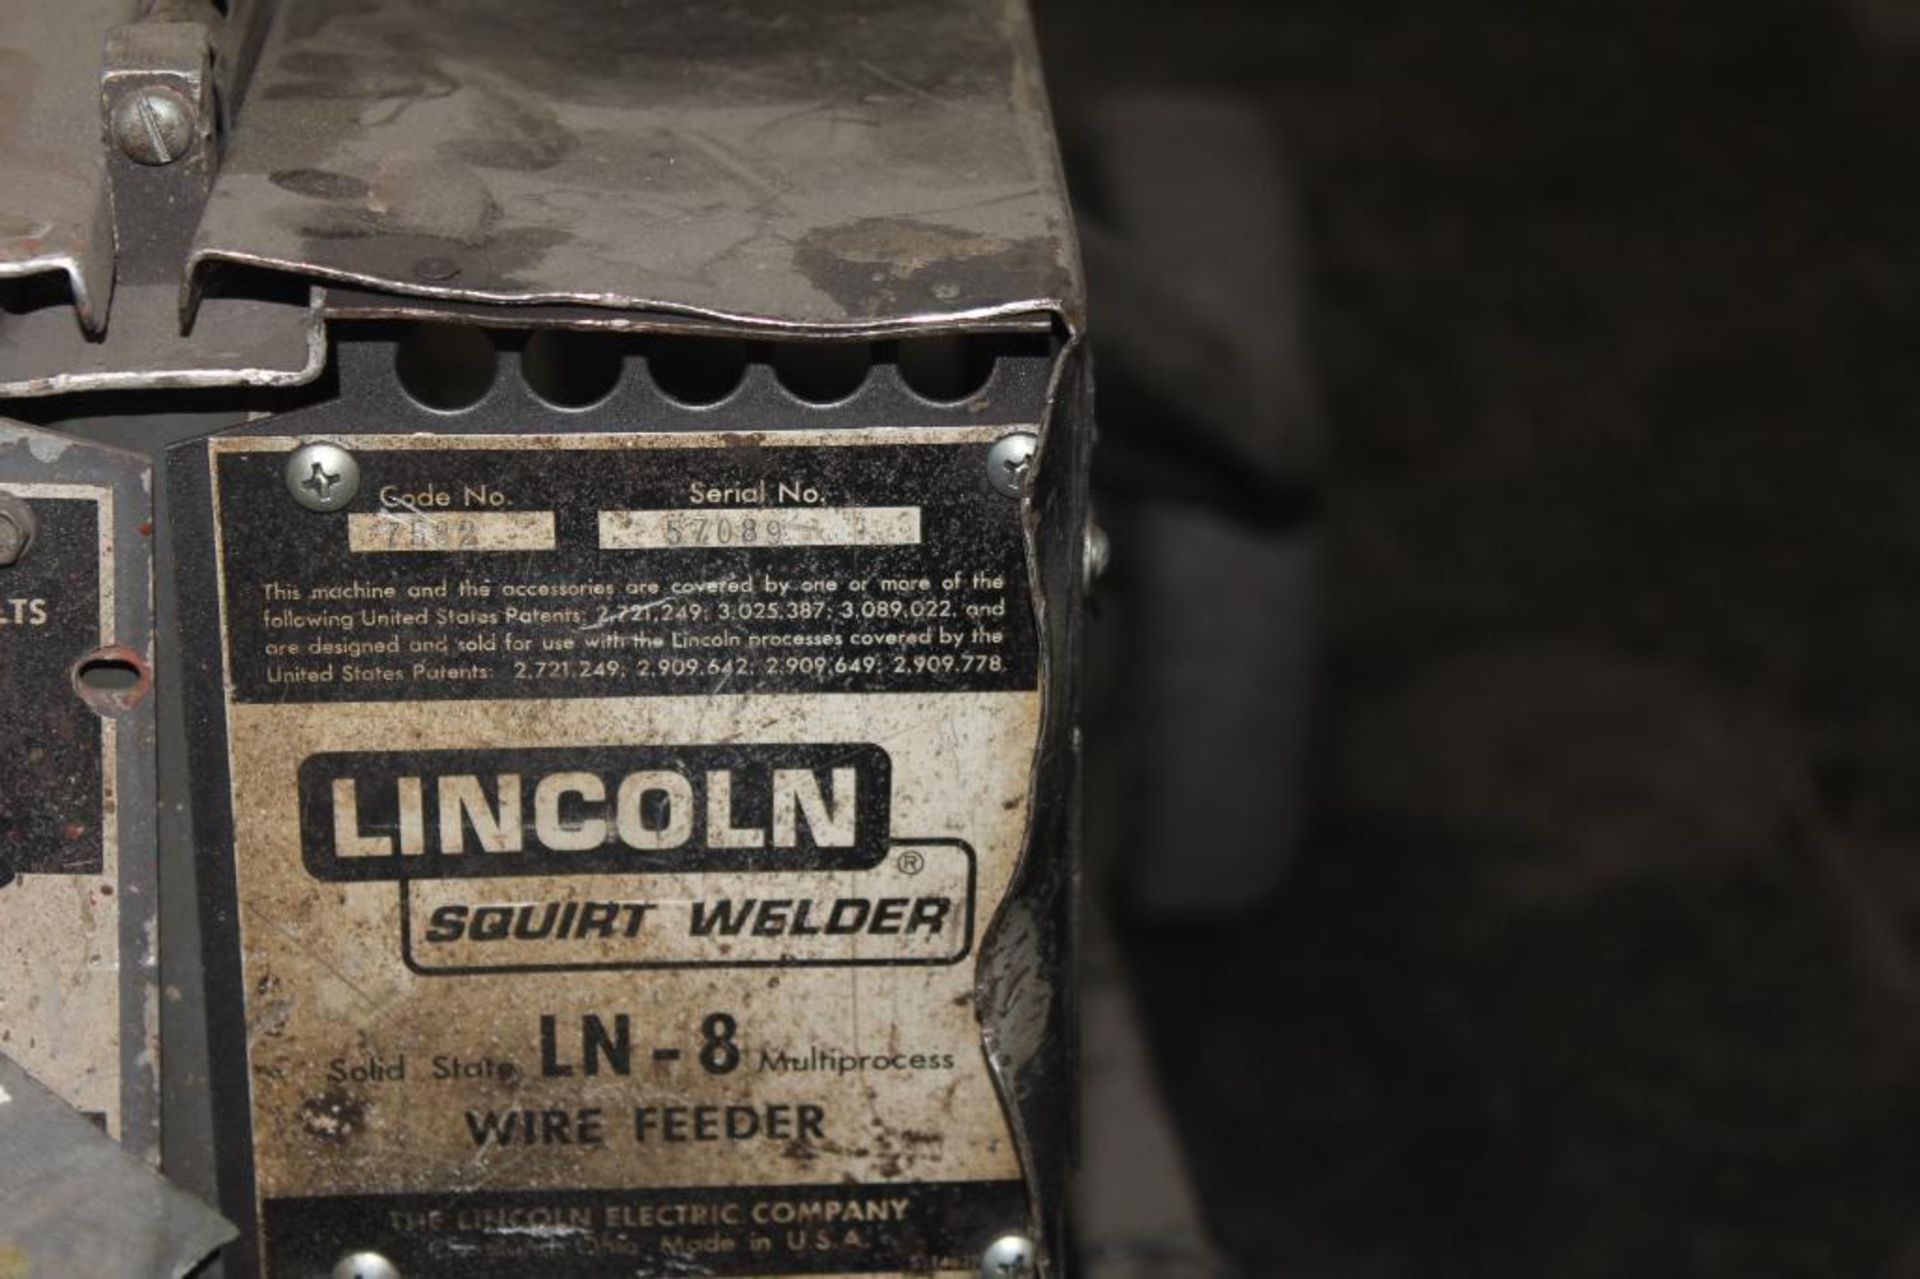 LINCOLN ELECTRIC IDEALARC DC-600 WELDER SN.AC658235 230-460V WITH LN-8 WIRE FEED SN.57089 115V - Image 6 of 10